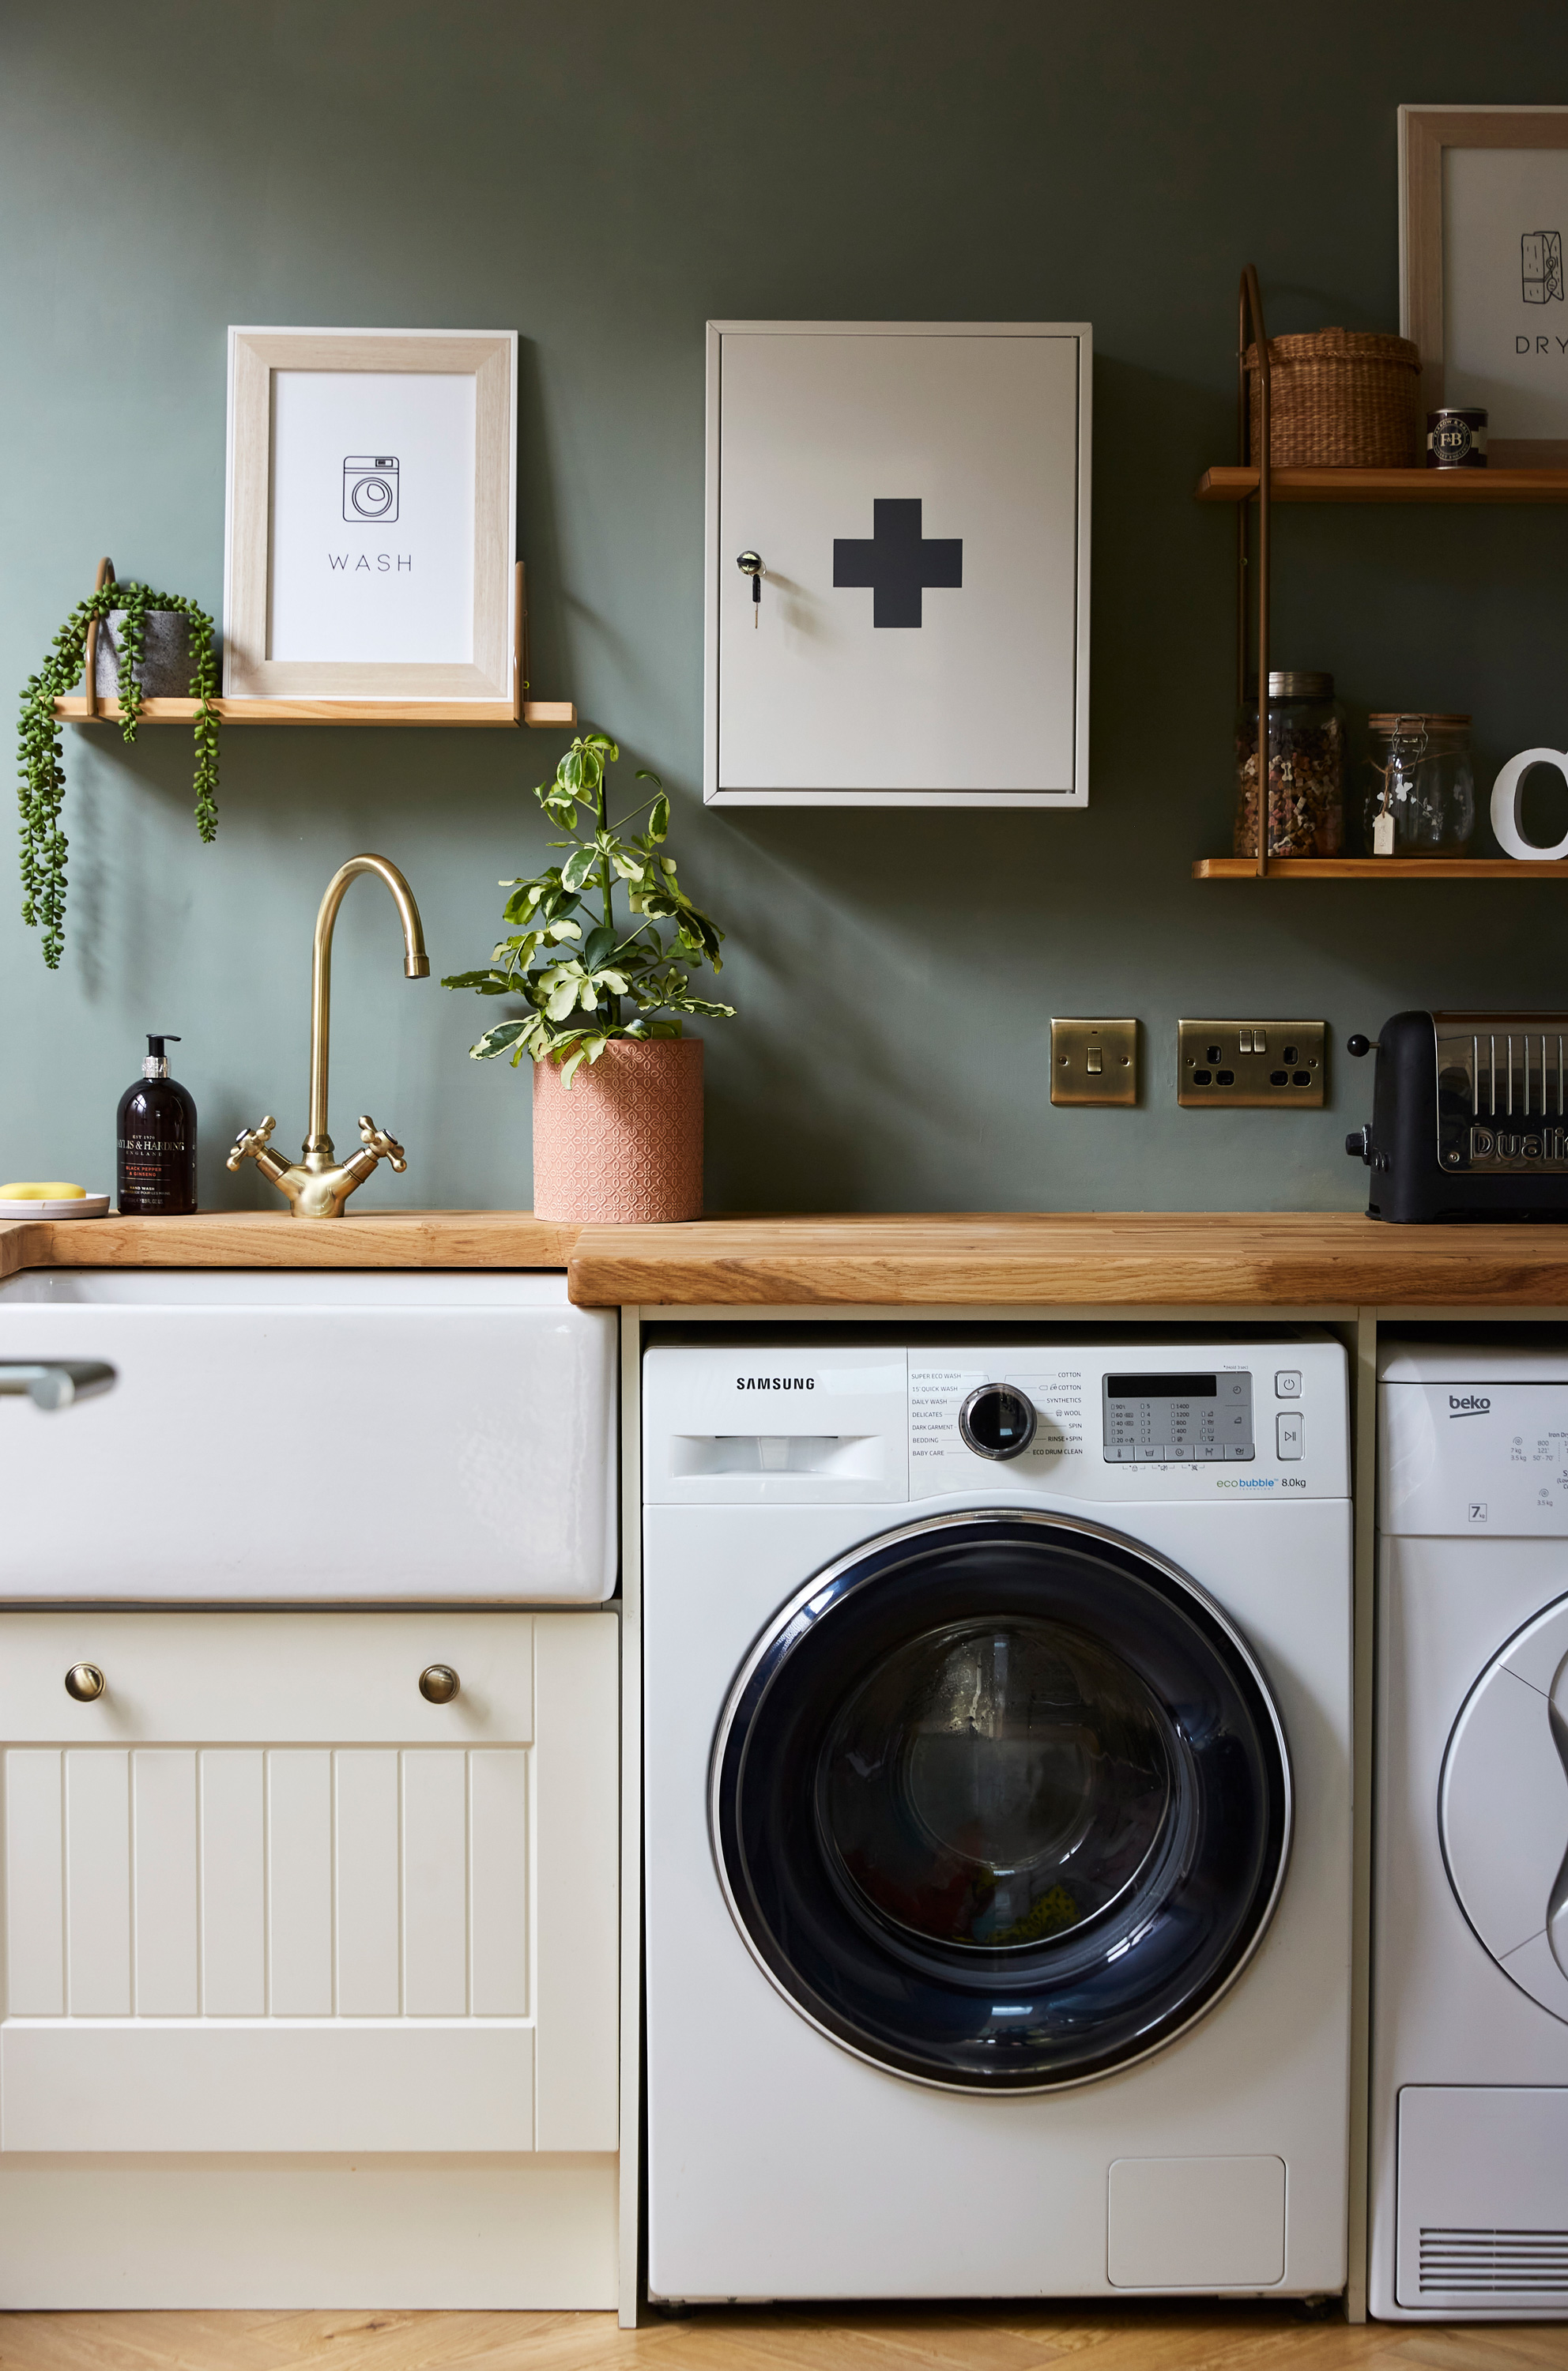 A laundry utility room with green wall paint decor and white washing machine